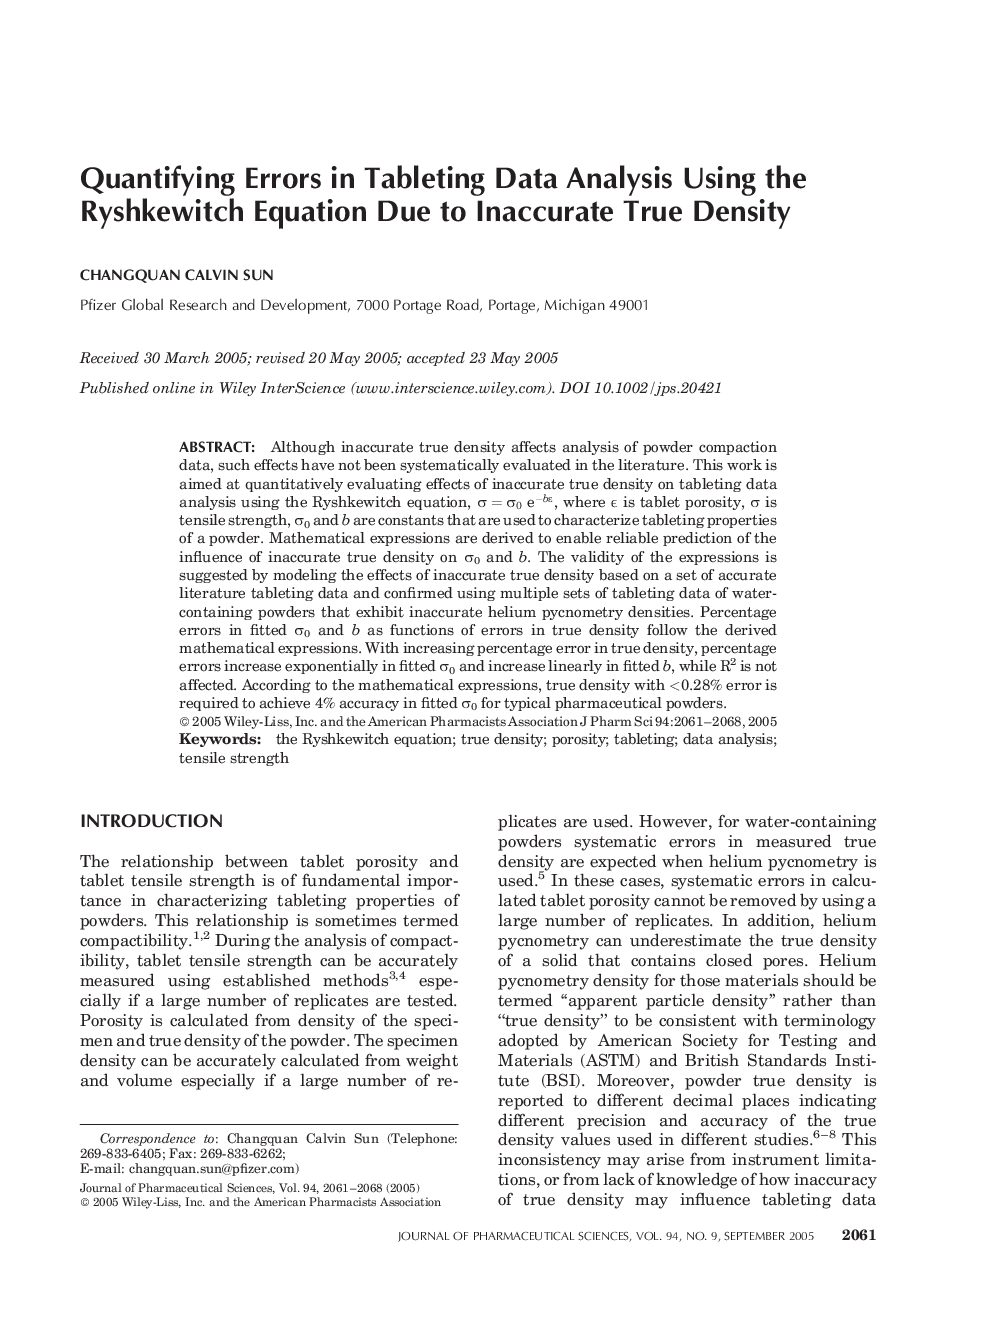 Quantifying Errors in Tableting Data Analysis Using the Ryshkewitch Equation Due to Inaccurate True Density